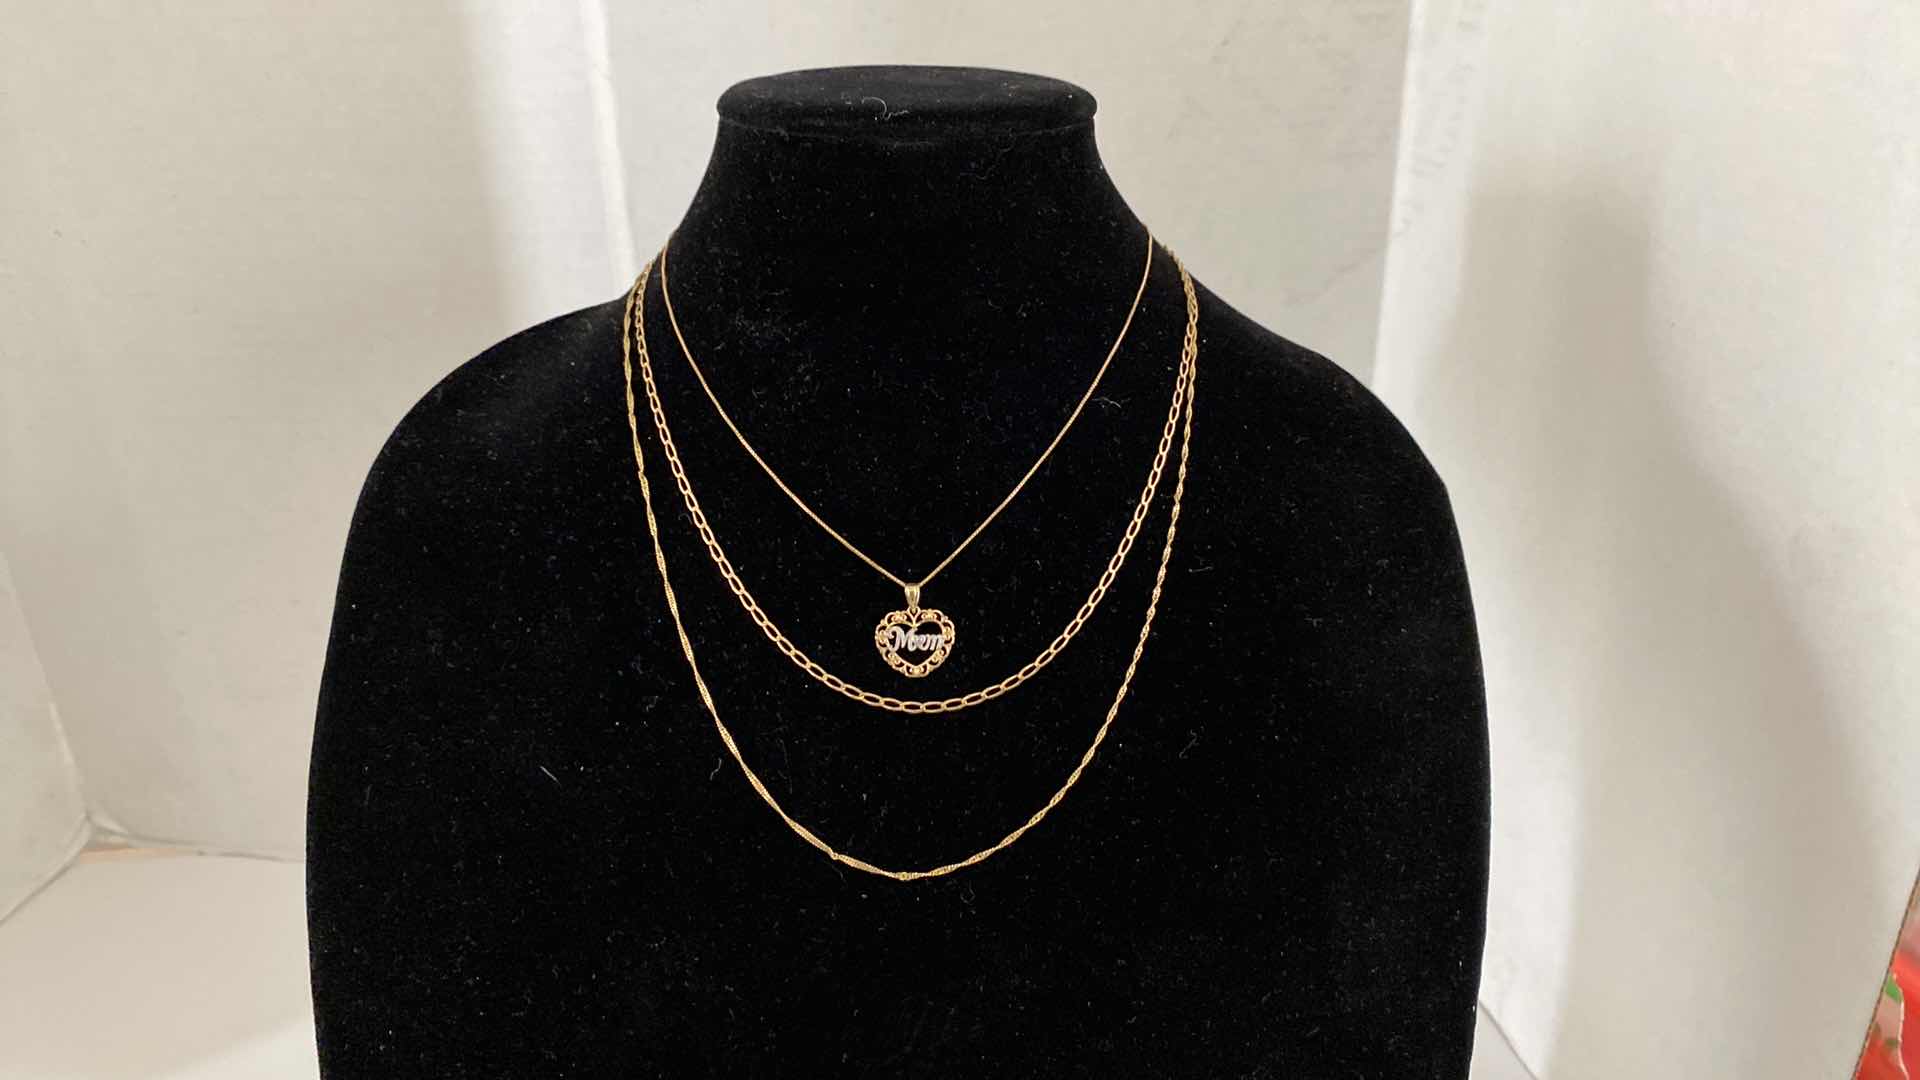 Photo 1 of 3 - 14K GOLD NECKLACES